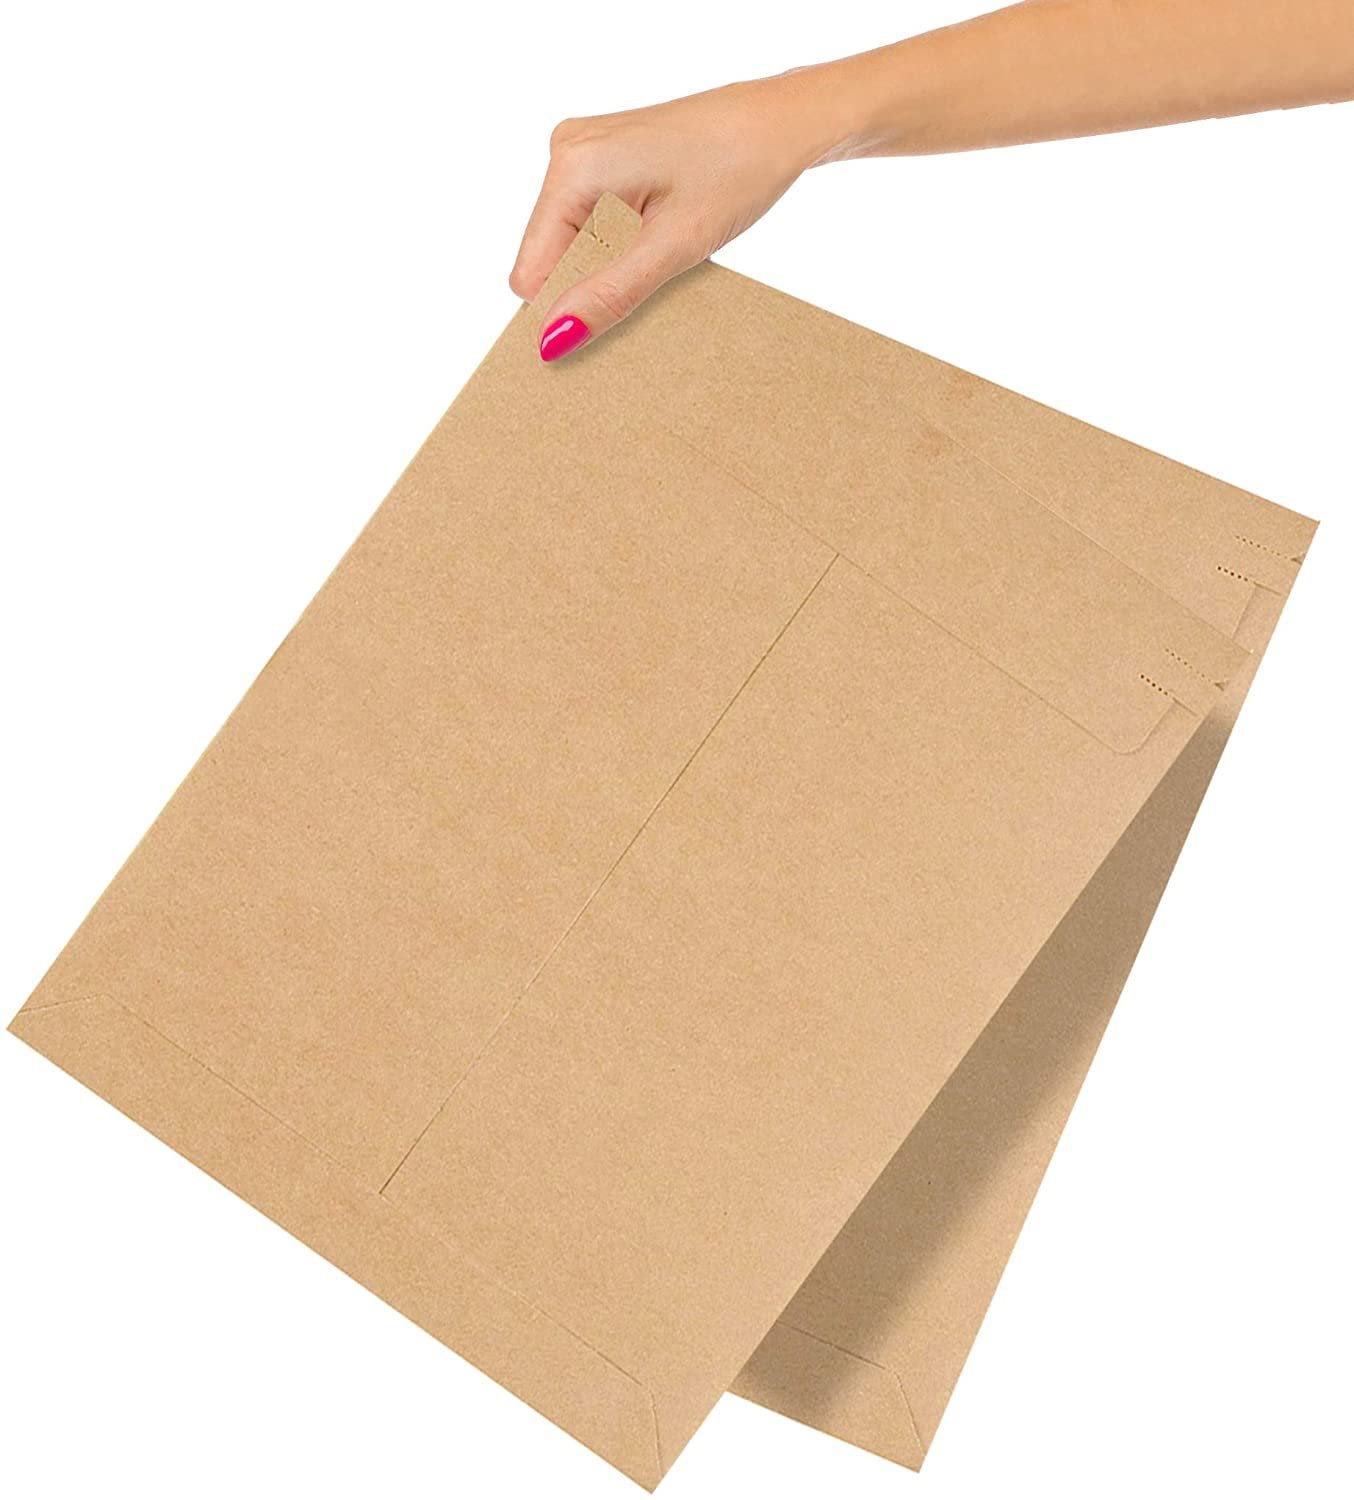 Wholesale Price. Compatible with USPS Express mail envelopes Packaging in Bulk ABC 10 Pack Rigid Mailers 6 x 6 White Paperboard Photo Document Envelopes Peel and Seal Stay Flat